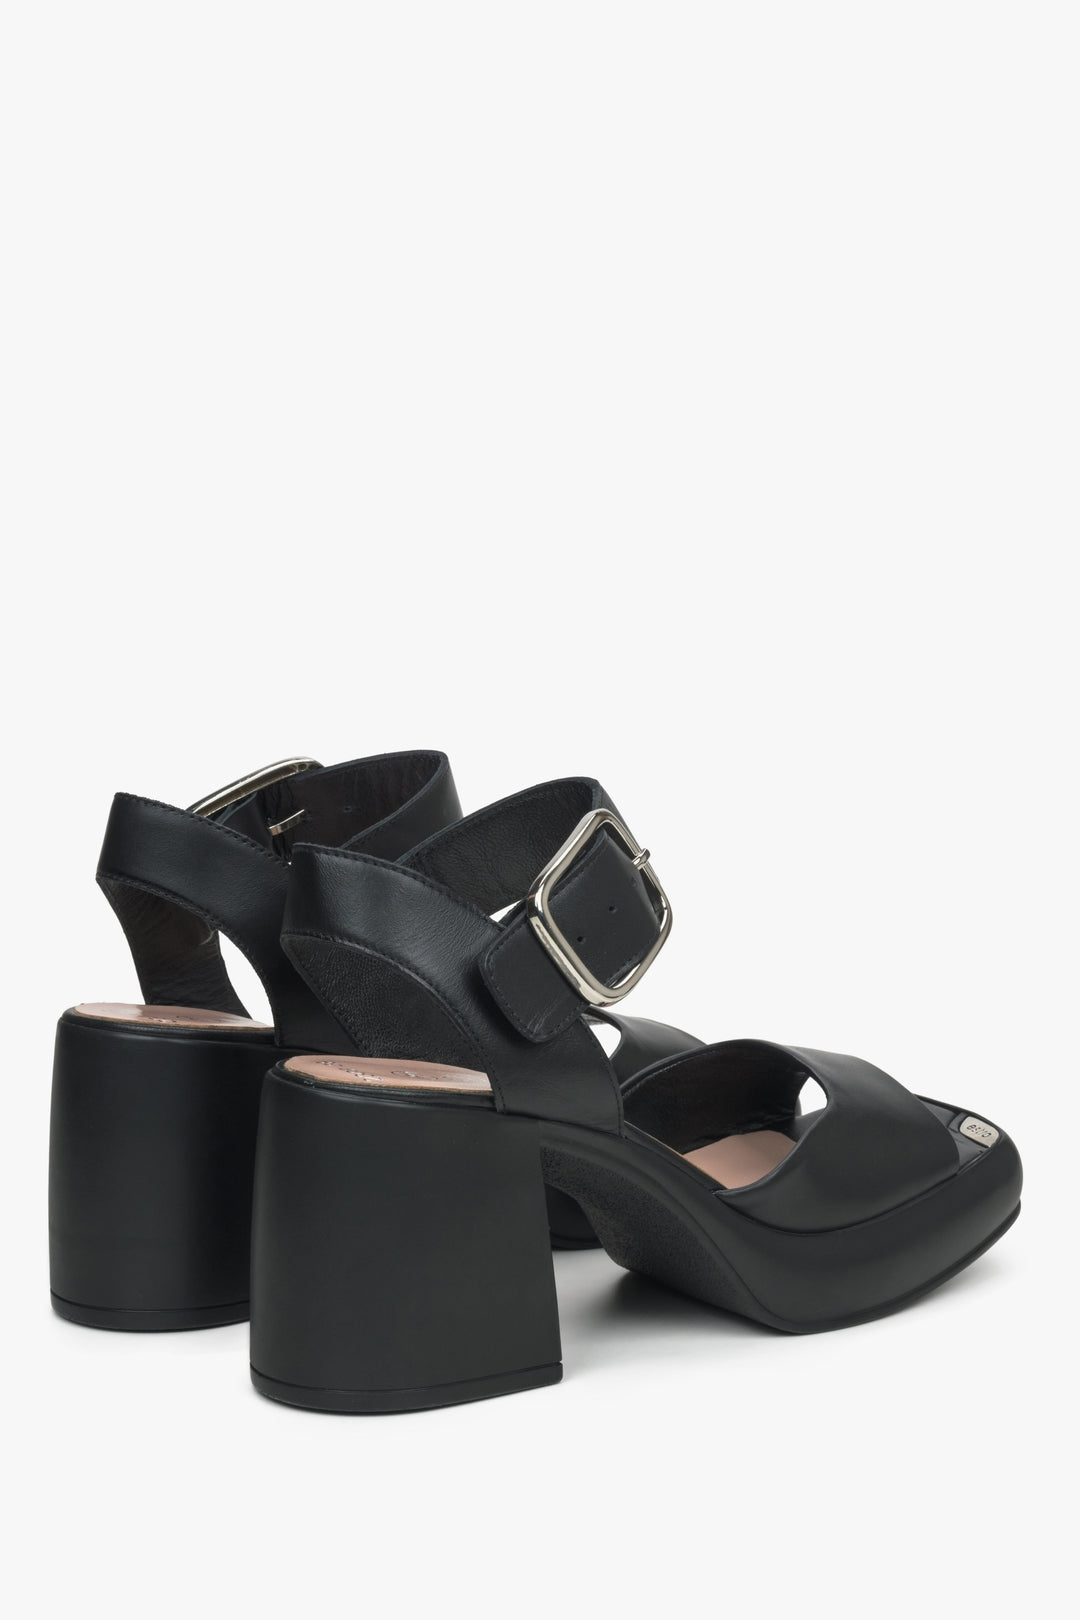 Women's black leather sandals by Estro - close-up of the heel and side profile of the shoe.